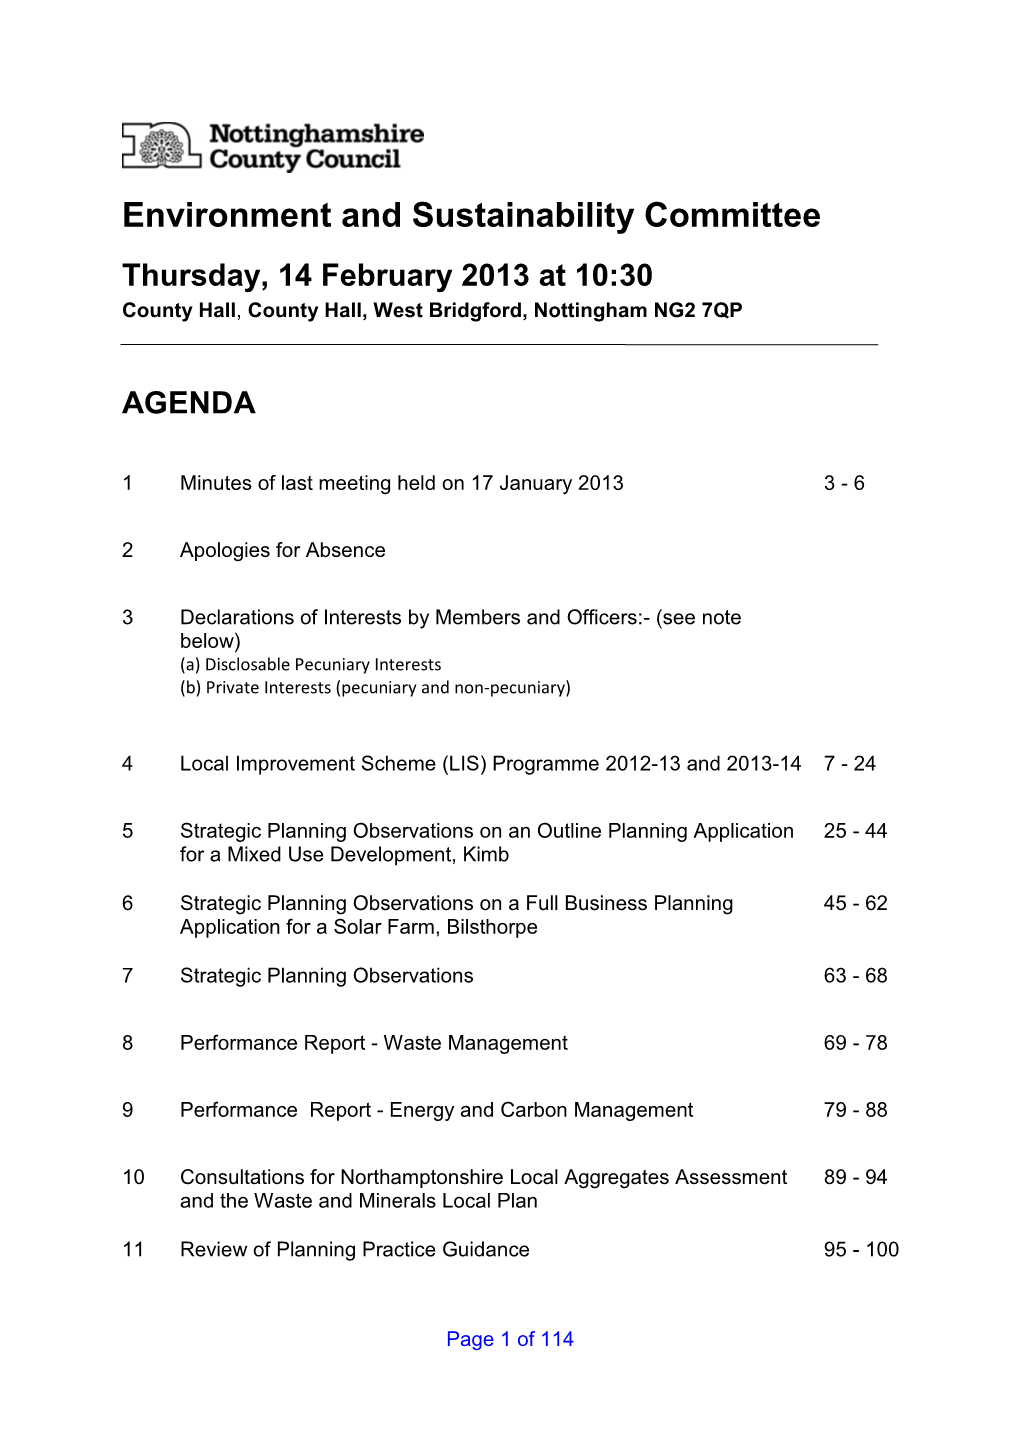 Environment and Sustainability Committee Thursday, 14 February 2013 at 10:30 County Hall , County Hall, West Bridgford, Nottingham NG2 7QP